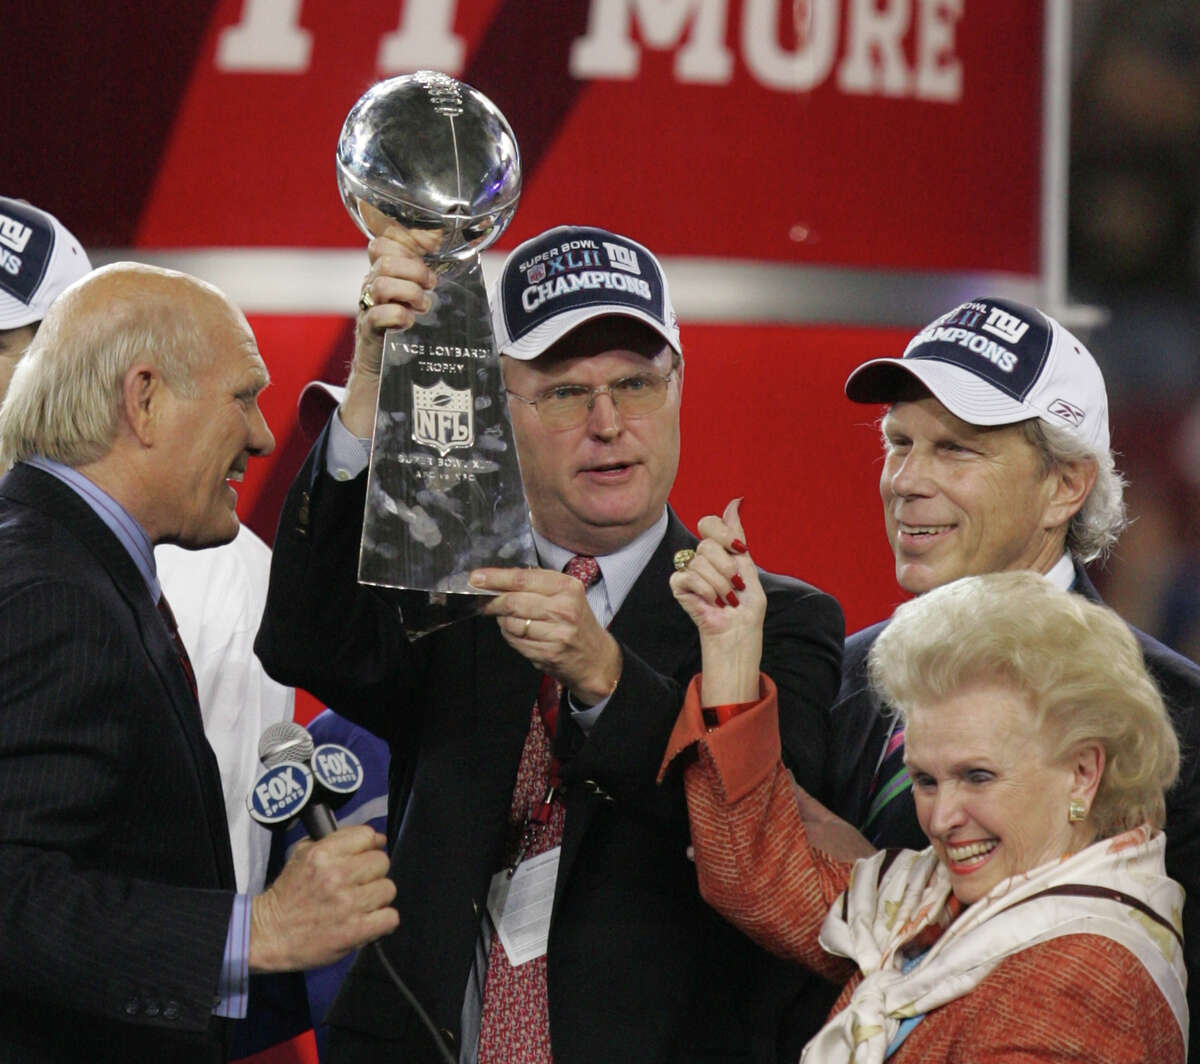 FILE - In this Sunday, Feb. 3, 2008, file photo, New York Giants owner John Mara holds the trophy with chairman Steve Tisch, back right, and Ann Mara after the Giants defeated the New England Patriots 17-14 to win Super Bowl XLII football game at University of Phoenix Stadium on in Glendale, Ariz. Ann Mara, the matriarch of the NFL's New York Giants for the past 60 years, died Sunday, Feb. 1, 2015. She was 85. (AP Photo/Chris O'Meara, File) ORG XMIT: NY124